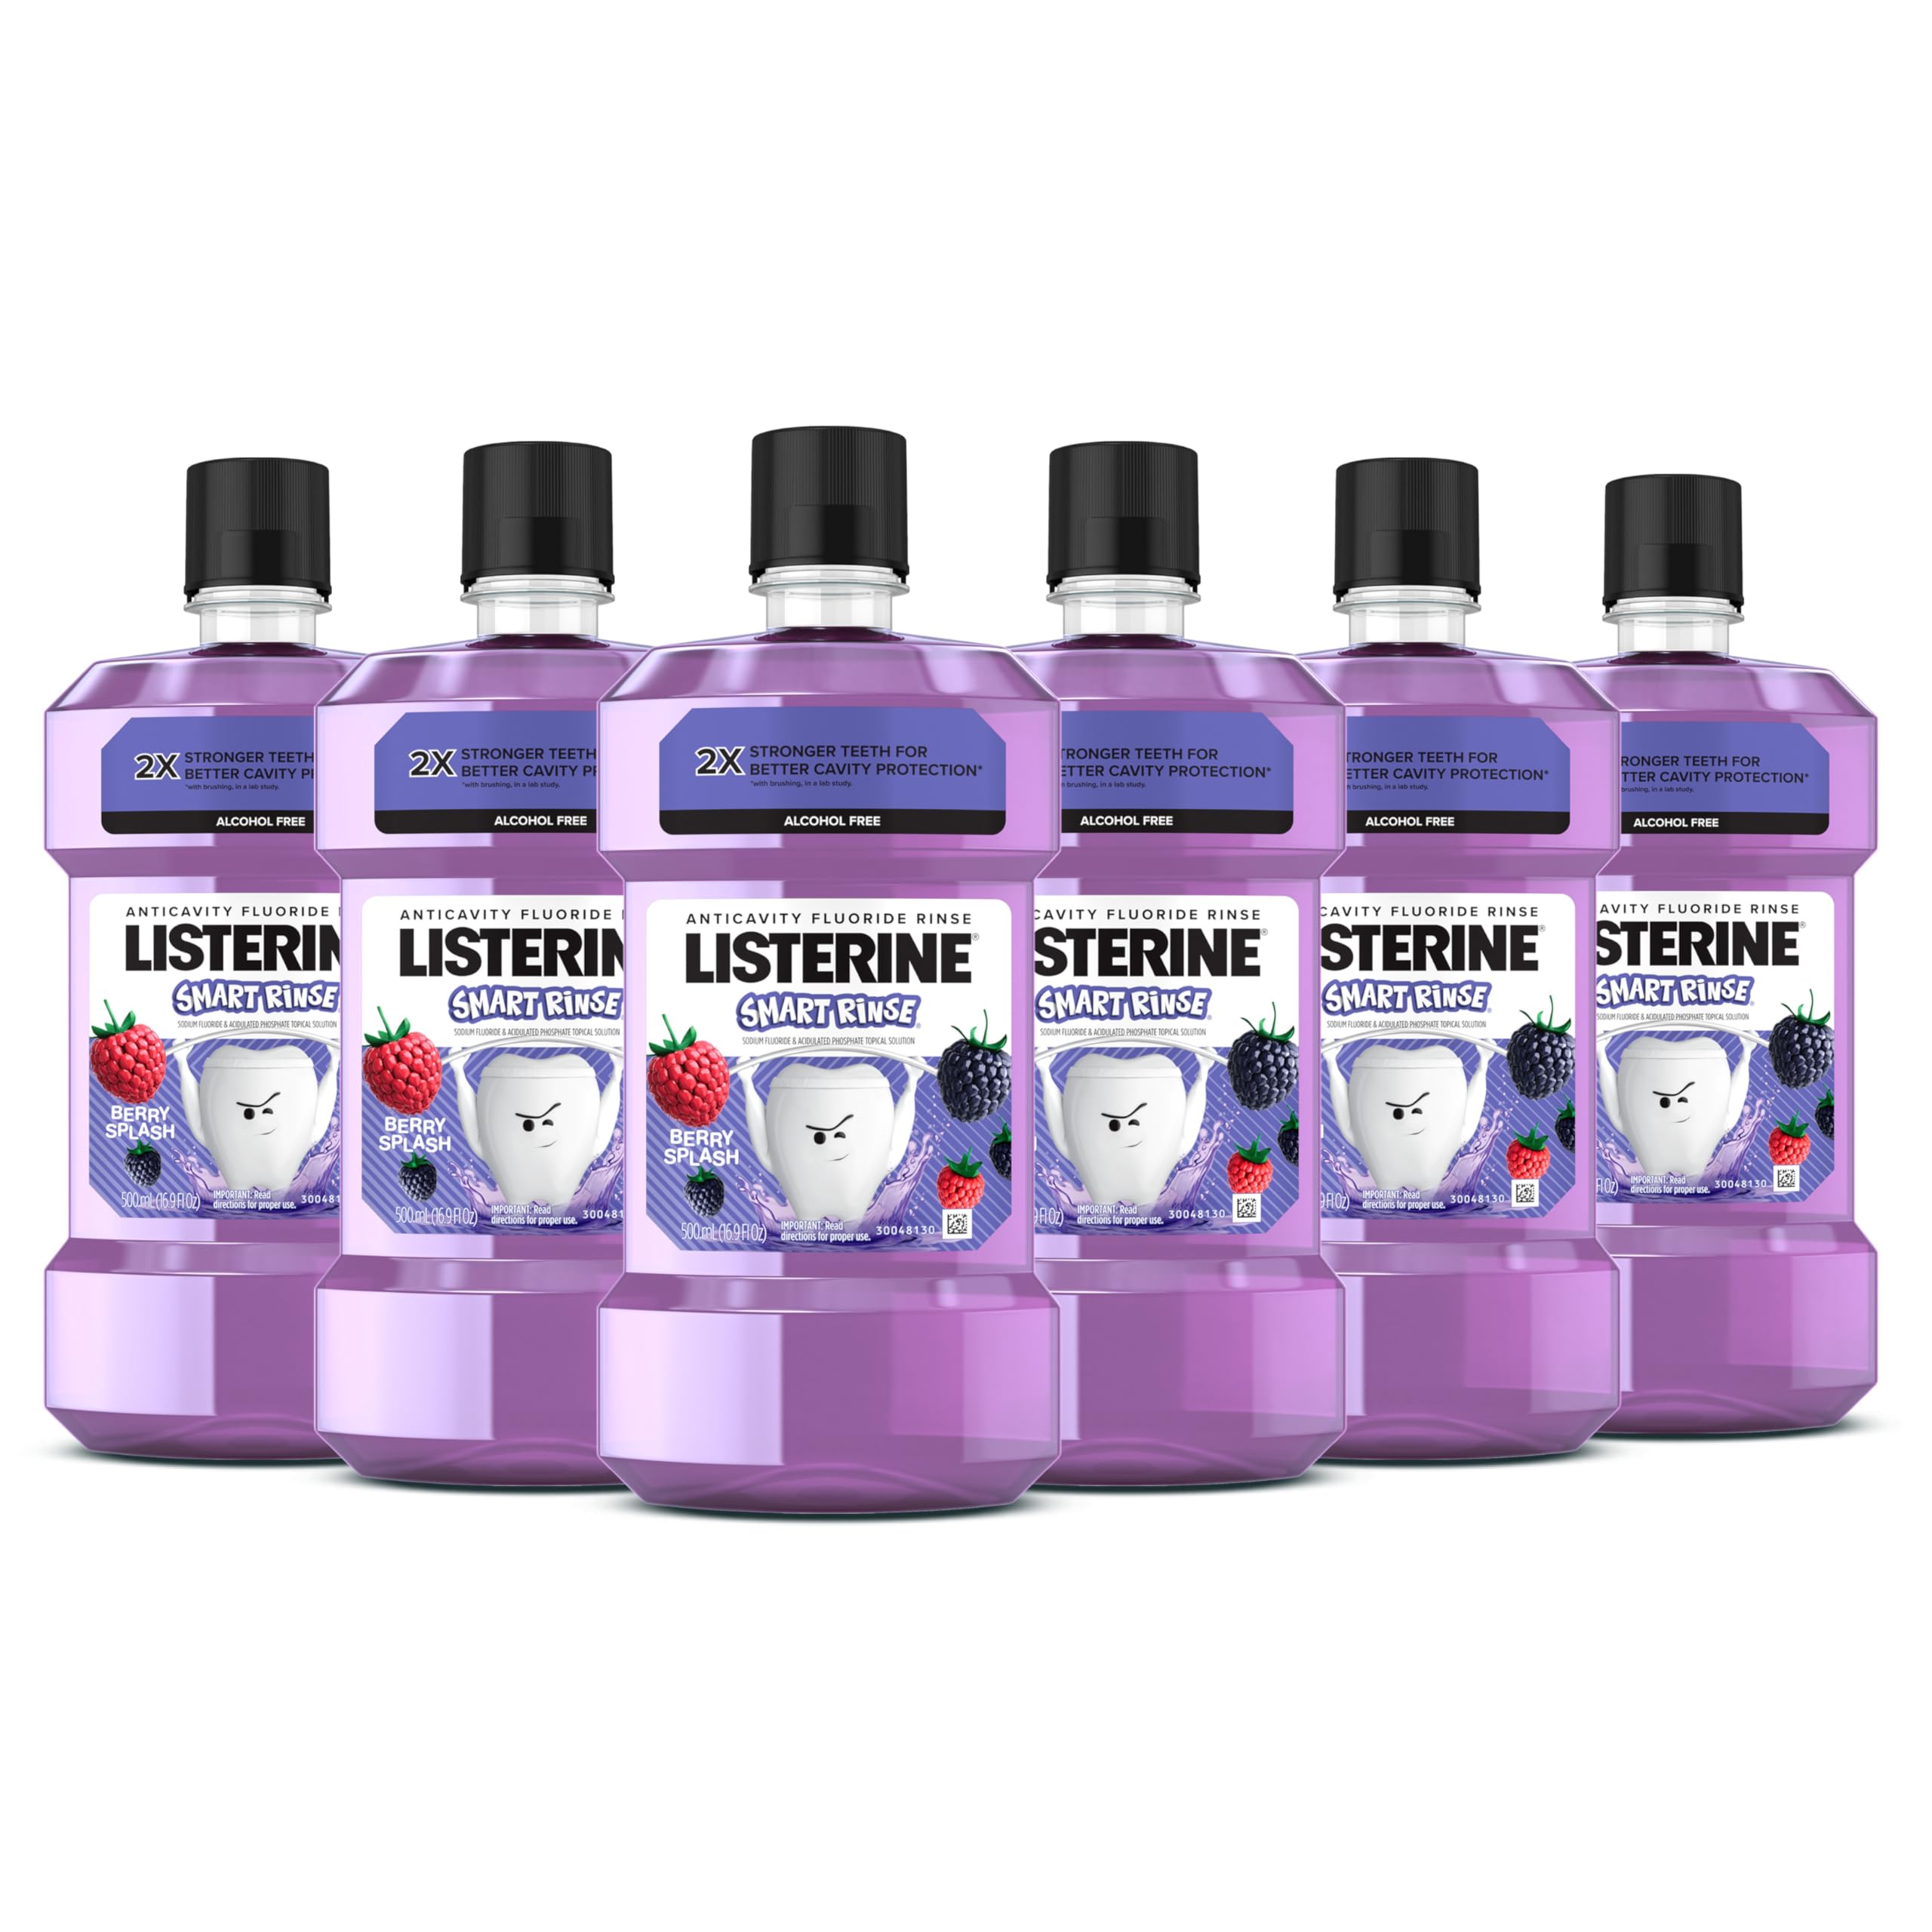 Listerine Smart Rinse Kids Mouthwash, ADA Accepted, Alcohol-Free Anticavity Fluoride Mouthwash, Oral Rinse for Cavity Protection, Berry Splash Flavor for Kids Oral Care, 500 mL